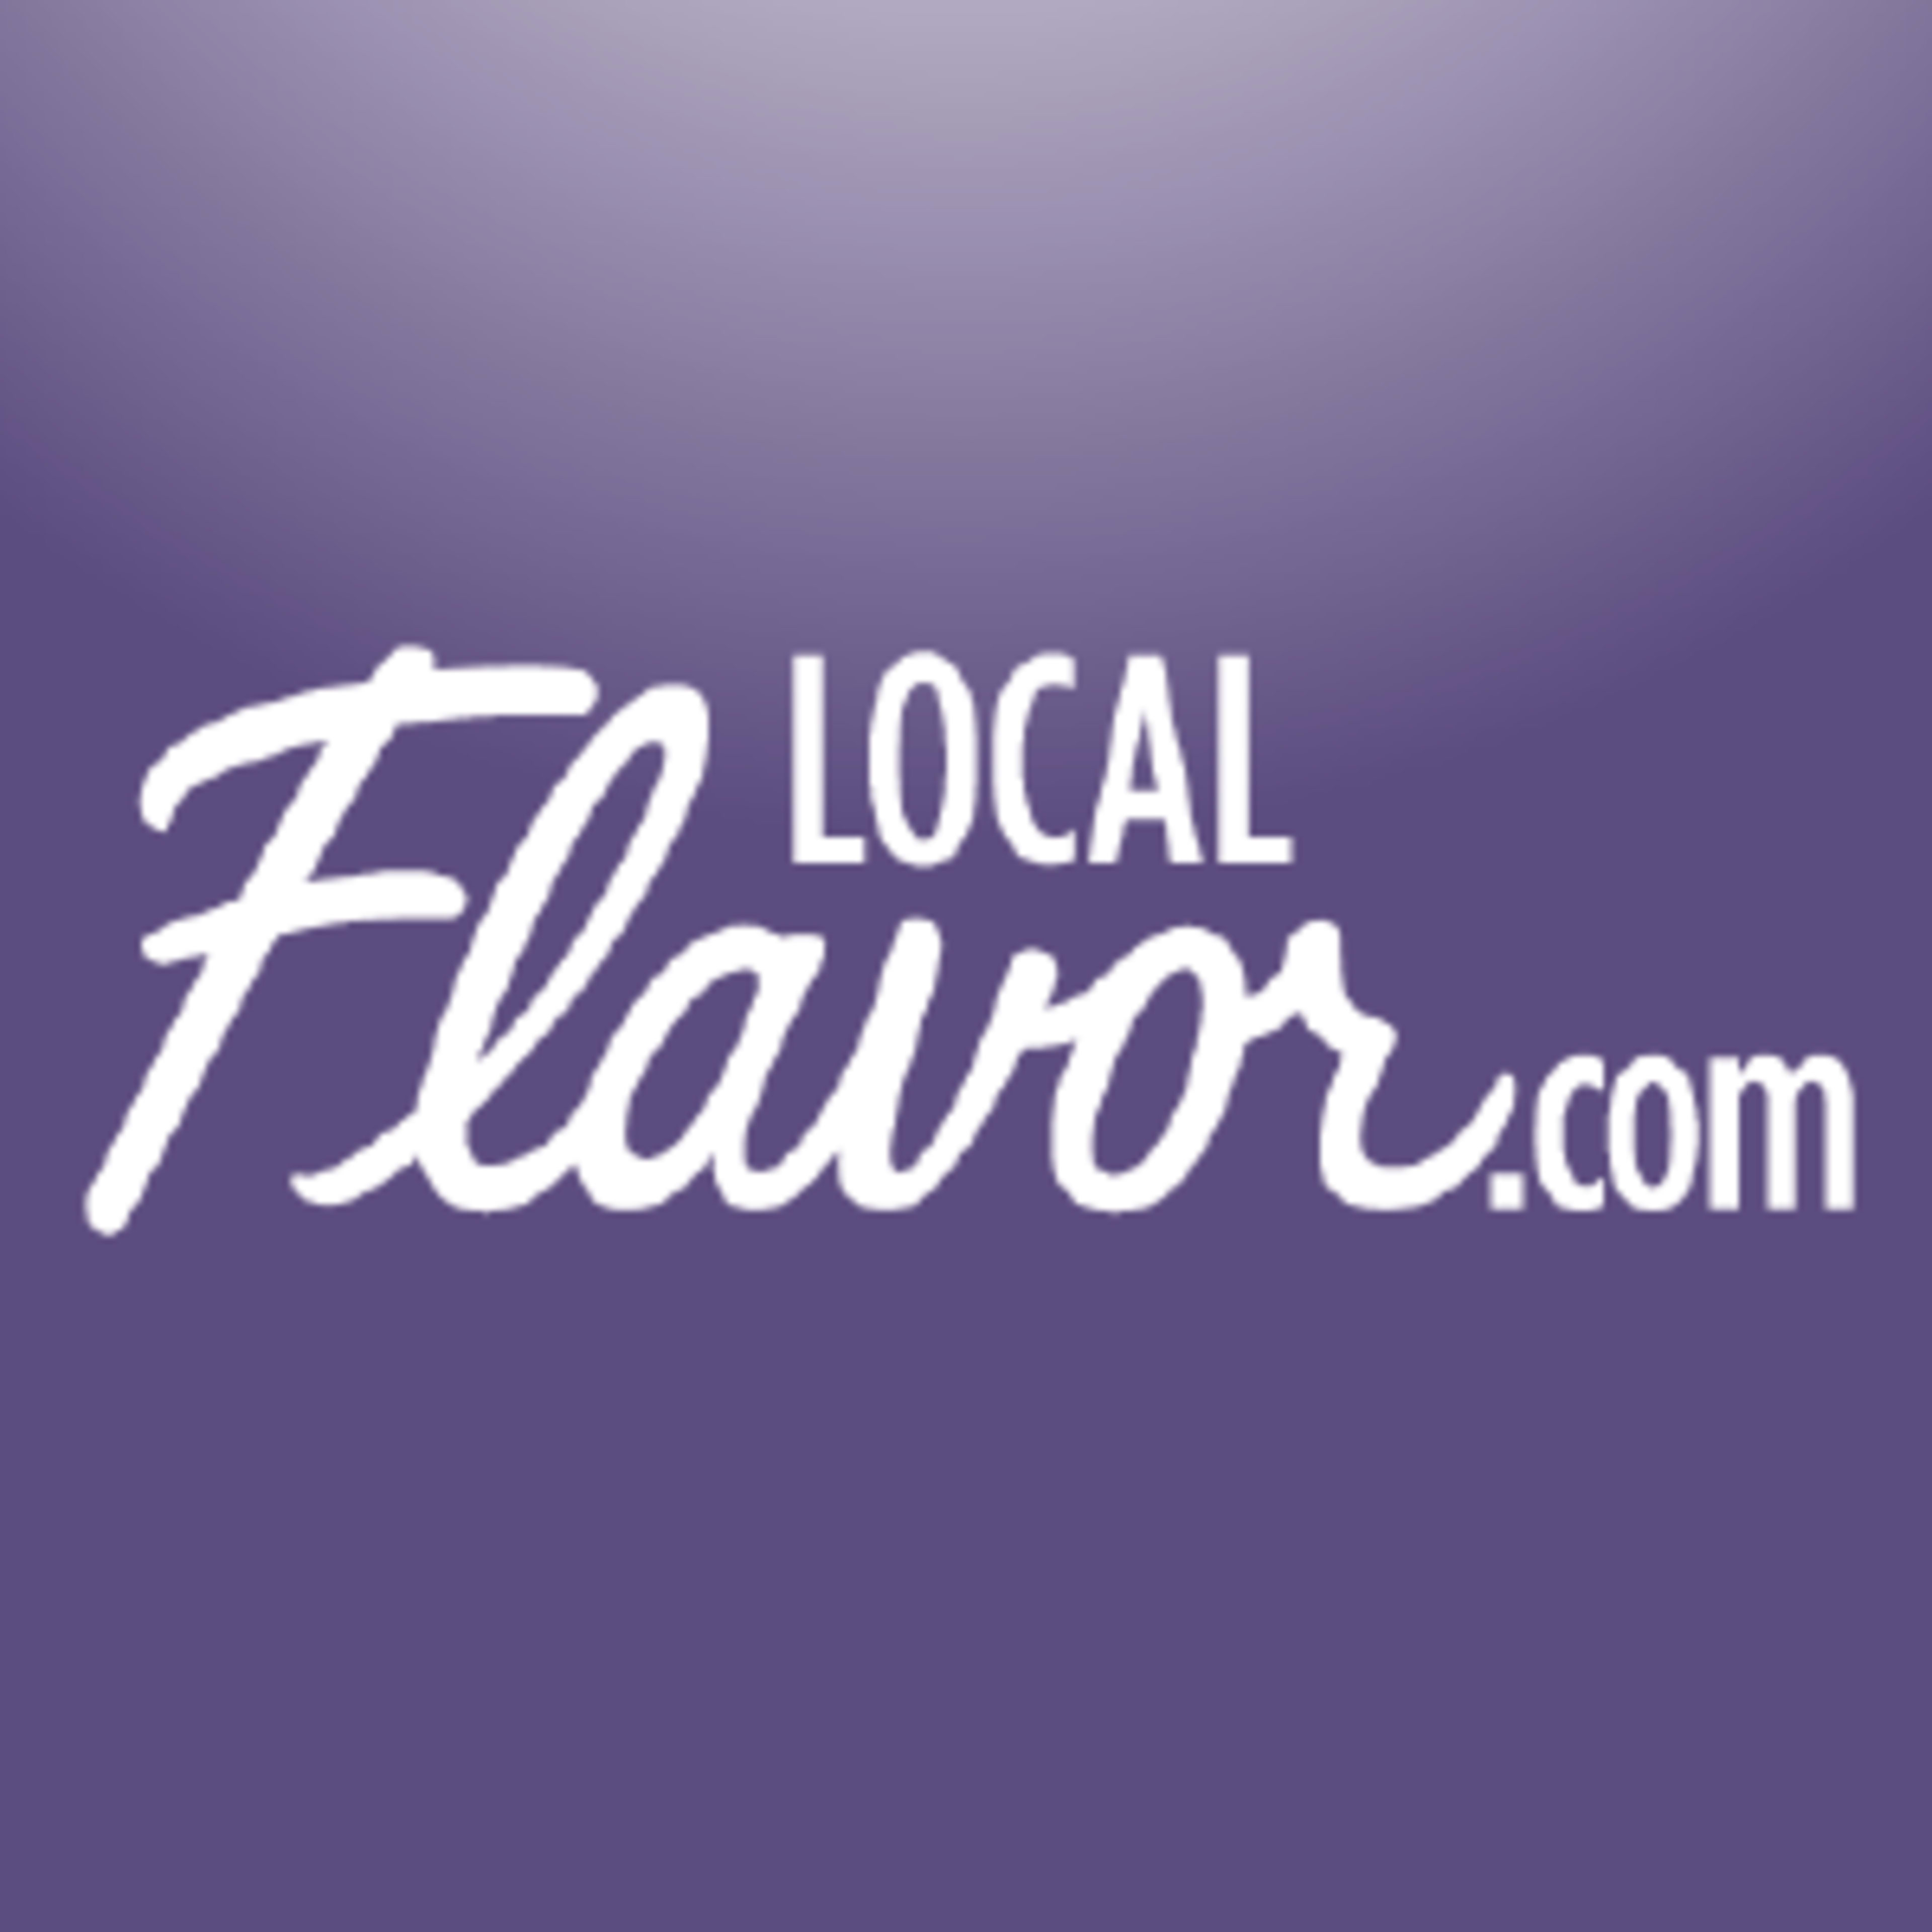 Local FlavorCode